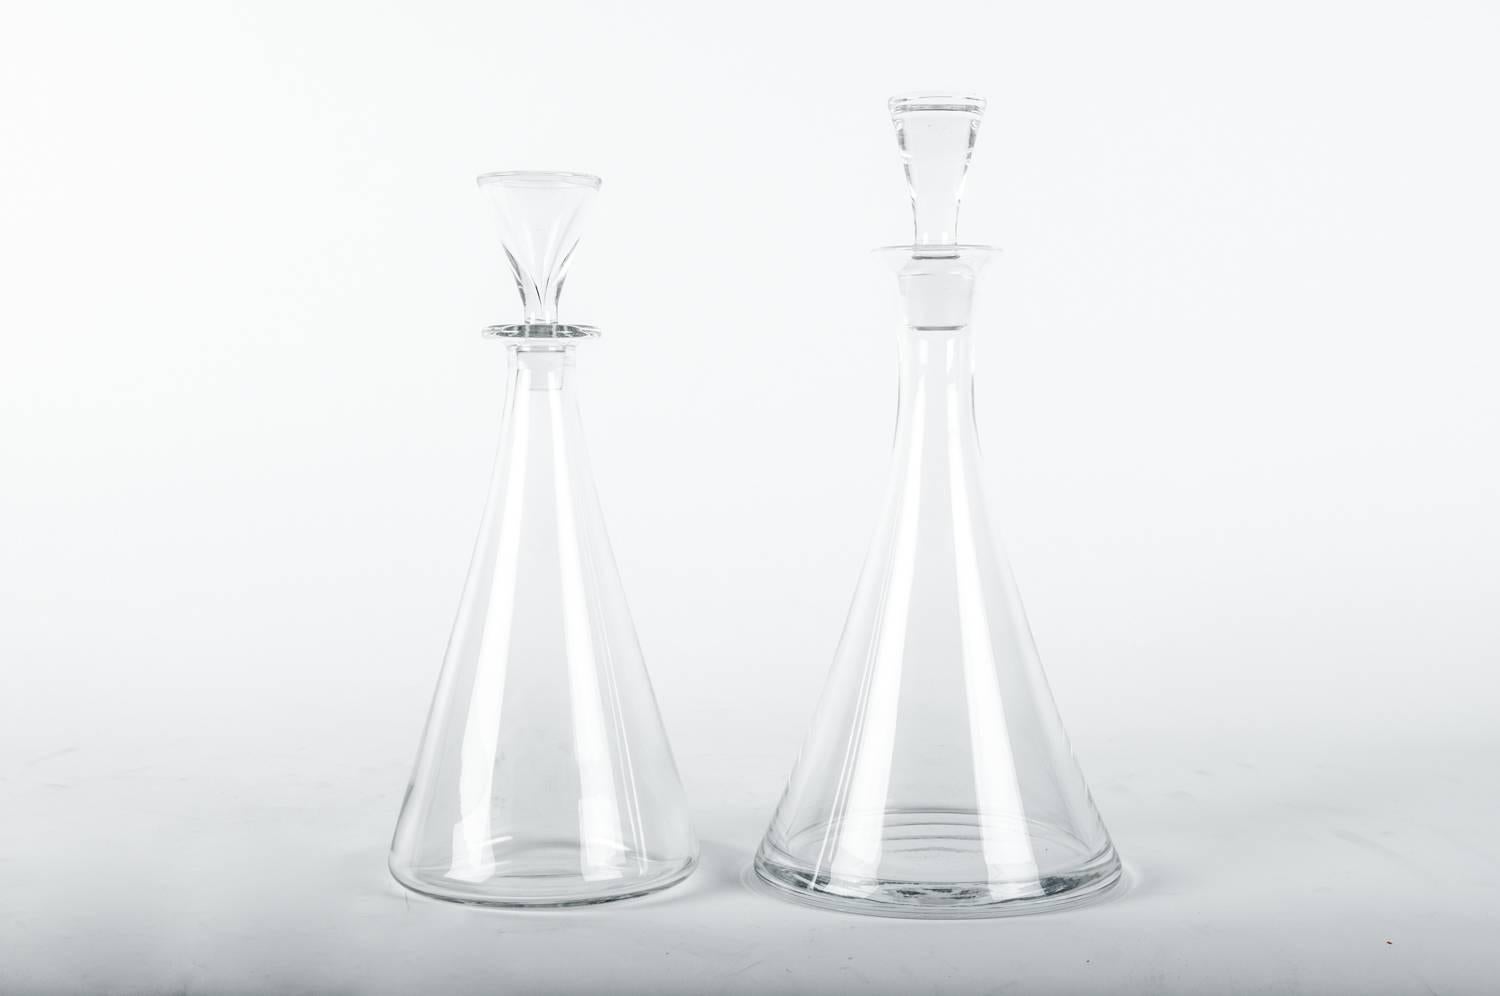 Mid-20th century pair of Baccarat crystal Art Deco style drinks decanter set. . Each decanter is in excellent vintage condition. Taller decanter measure 13.5 inches high x 6 inches base diameter. The shorter one measure 12 inches high x 5 inches